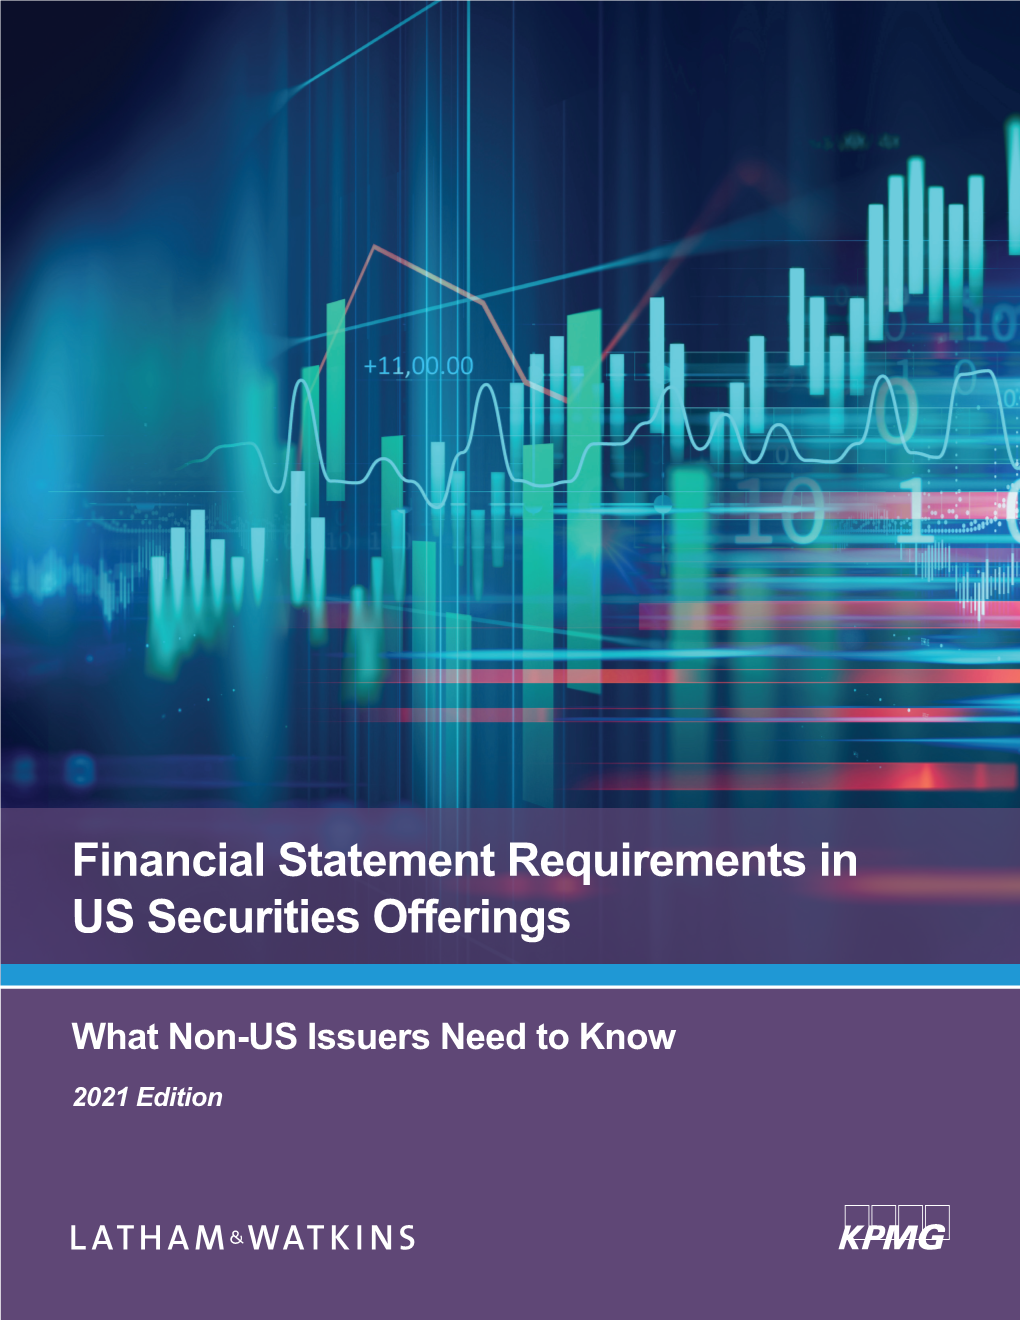 Financial Statement Requirements in US Securities Offerings